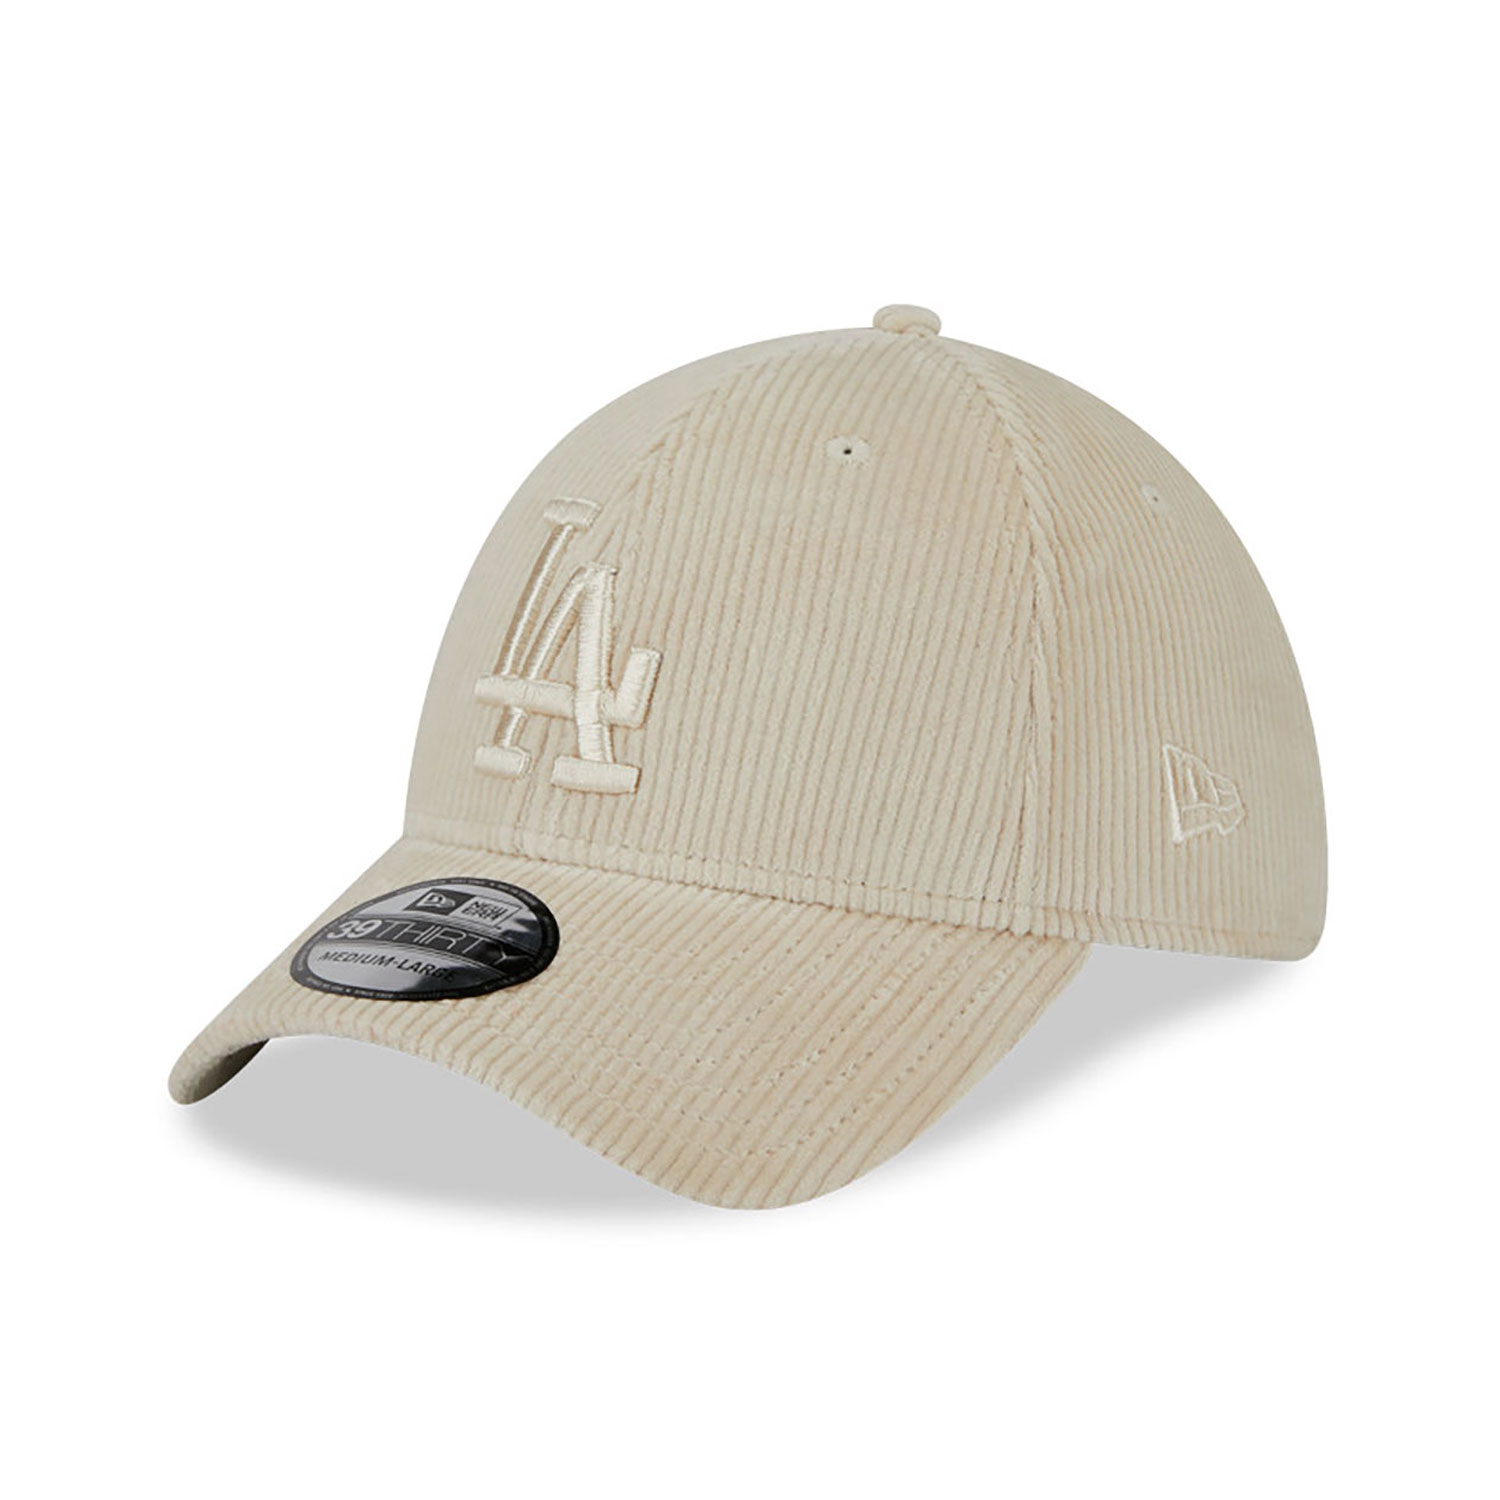 LA Dodgers Wide Cord Stone 39THIRTY Stretch Fit Cap